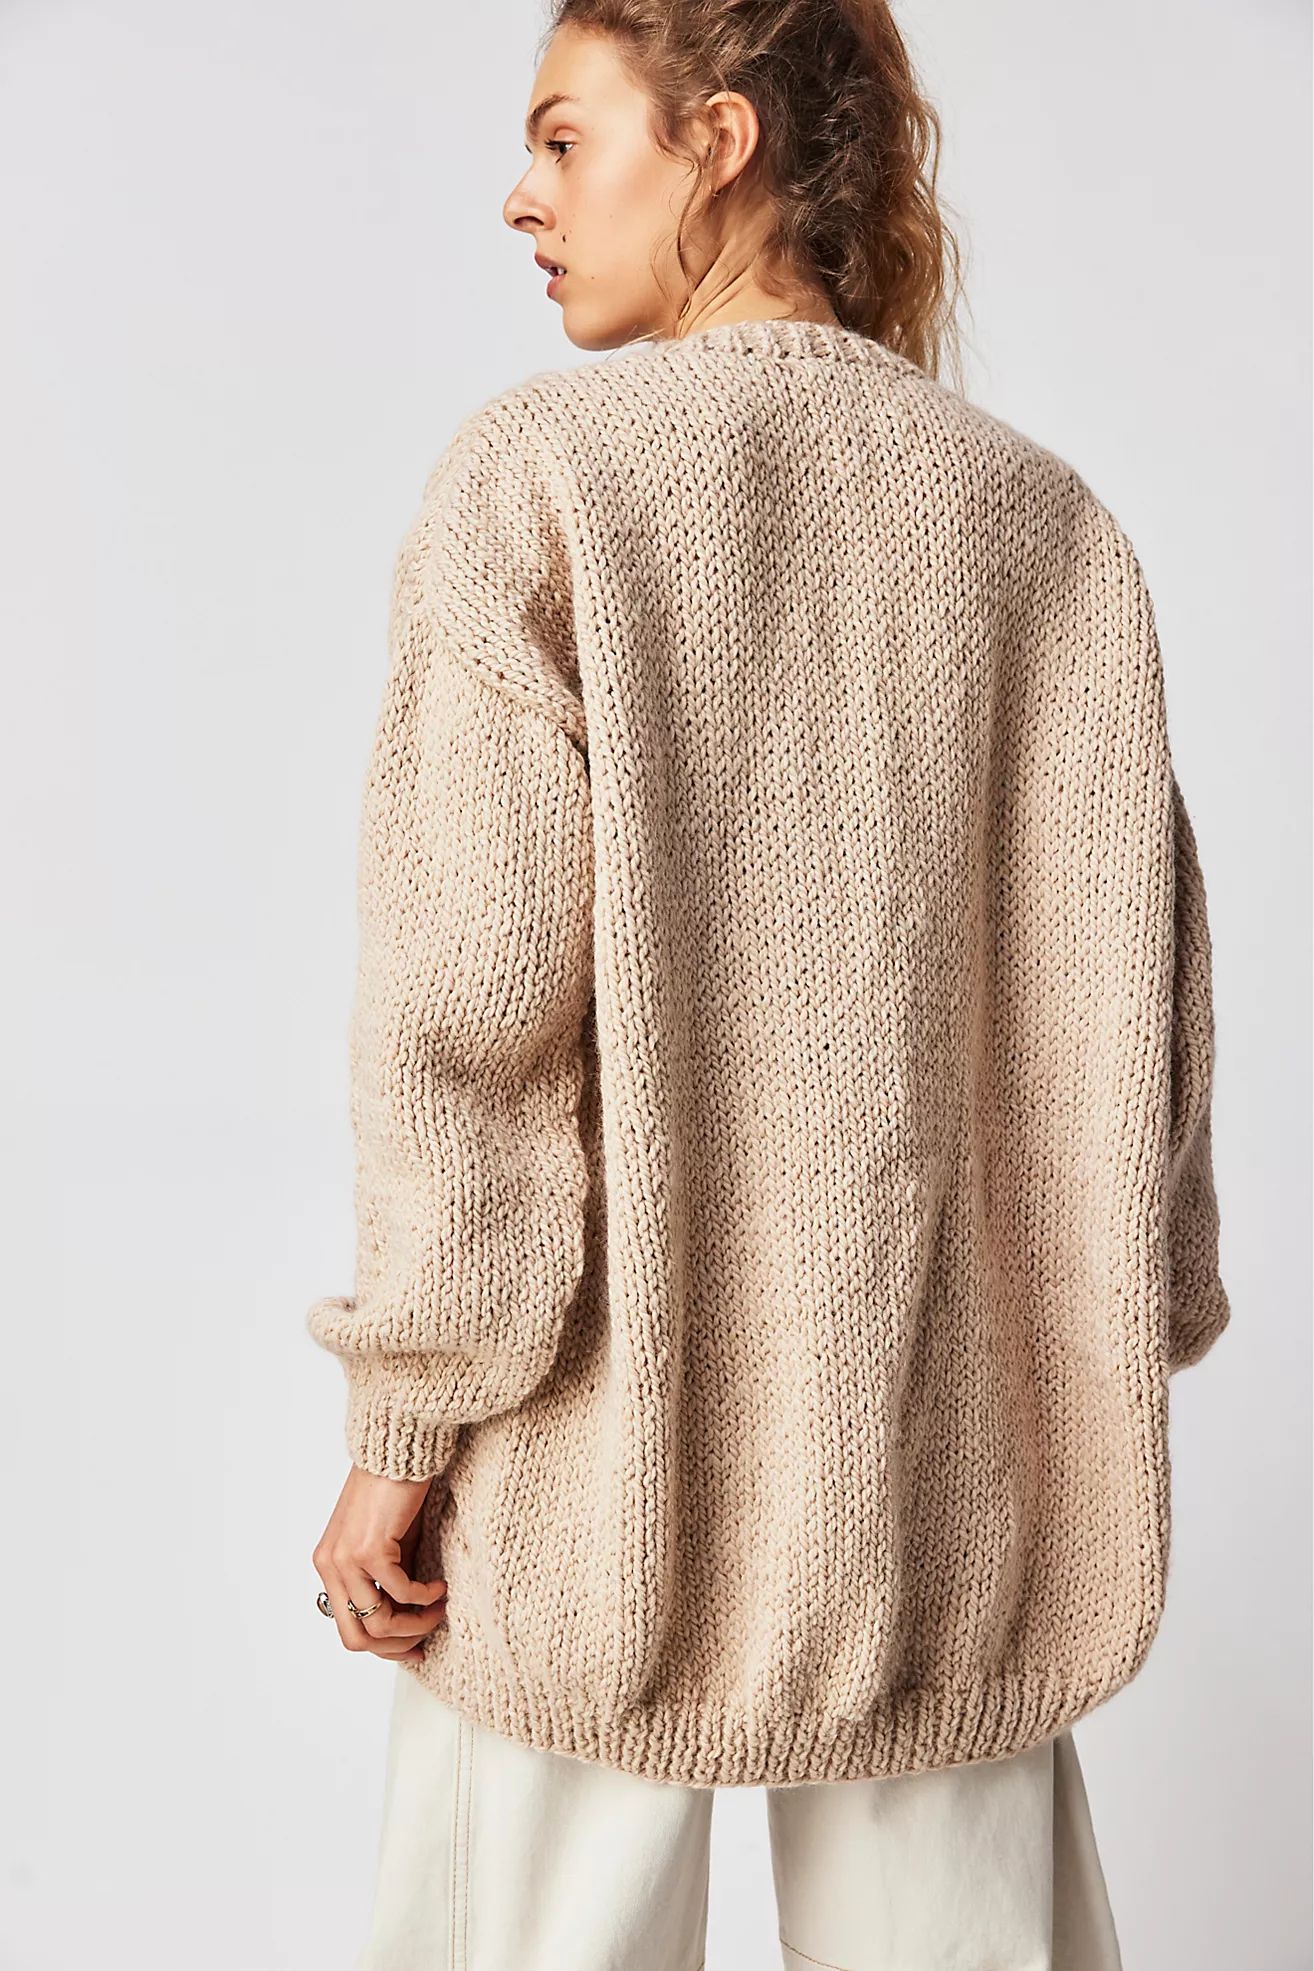 The Knotty Ones Twisted Erik Cardi | Free People (Global - UK&FR Excluded)